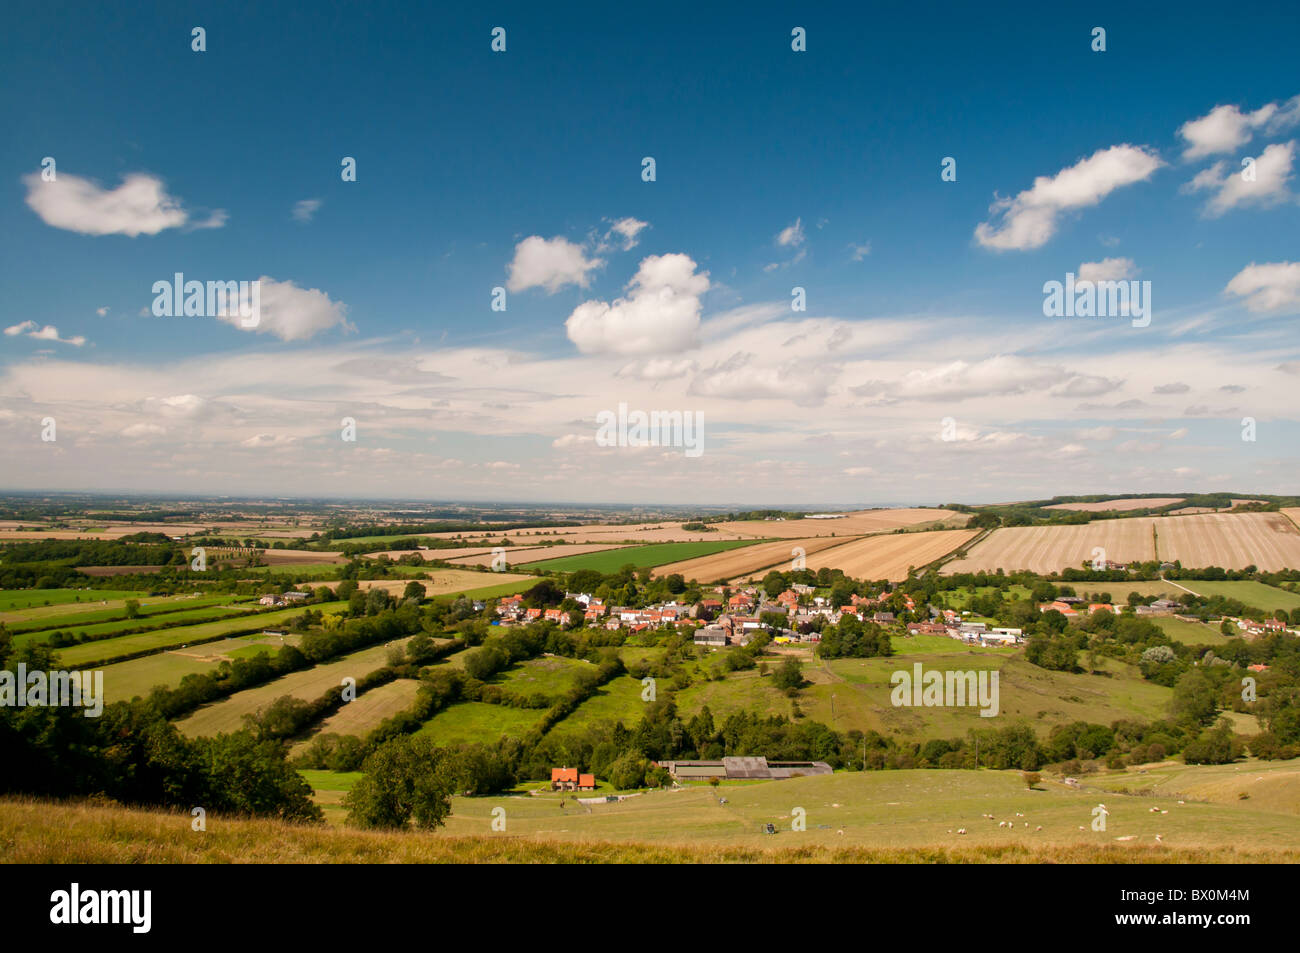 Panorama of Millington village in the Yorkshire Wolds, situated on both the Wolds Ways and the Minster Way long distance walking routes. Stock Photo